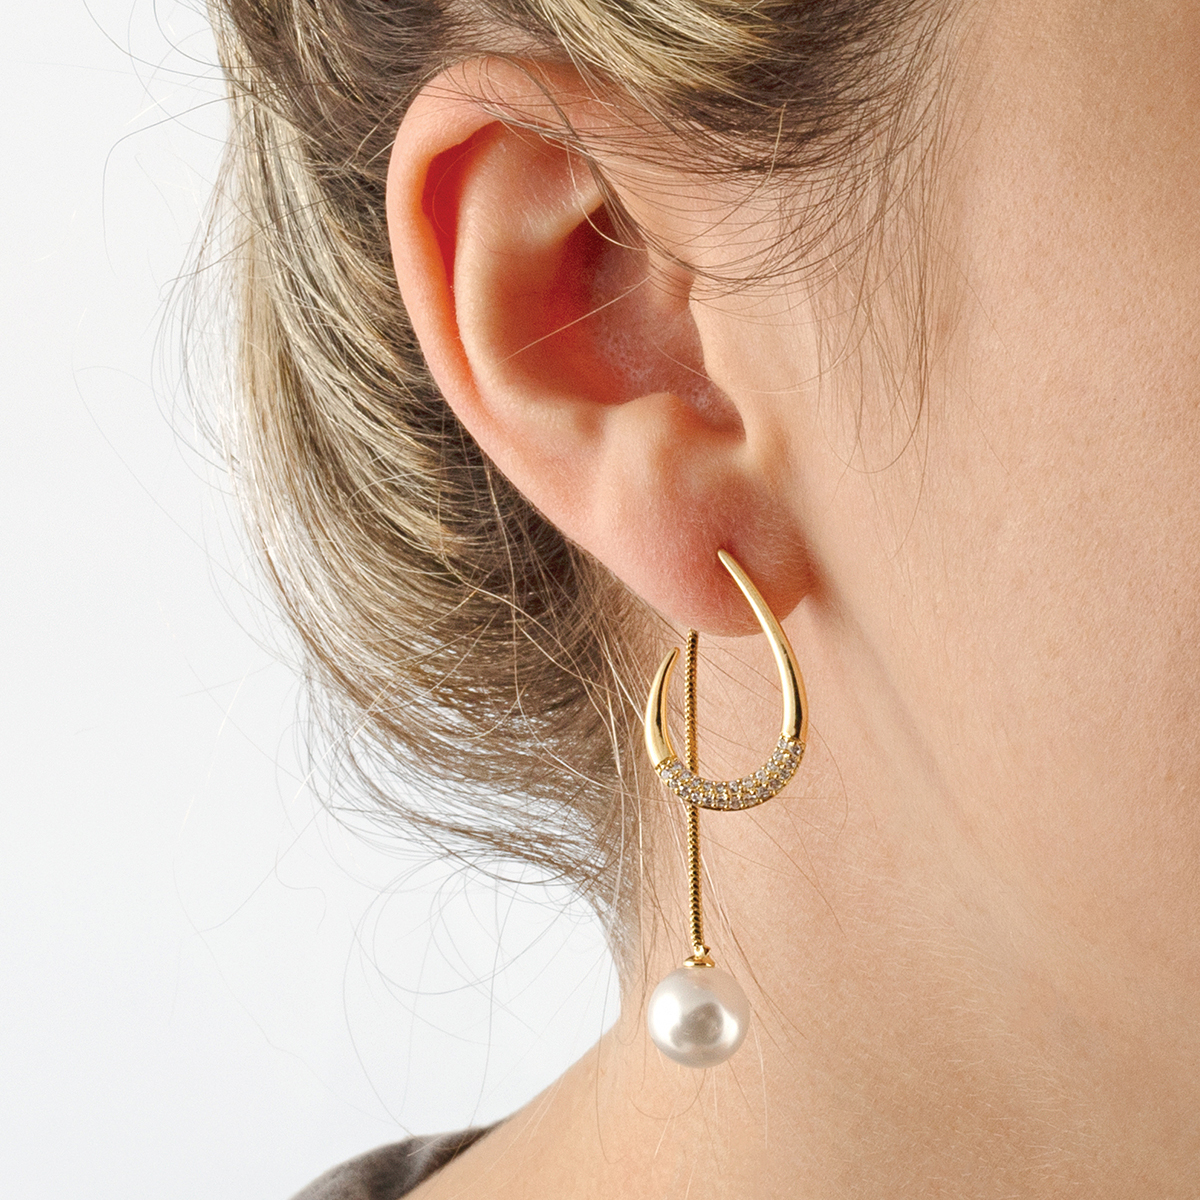 EARRINGS PEARL HOOP 2 PC - Click Image to Close